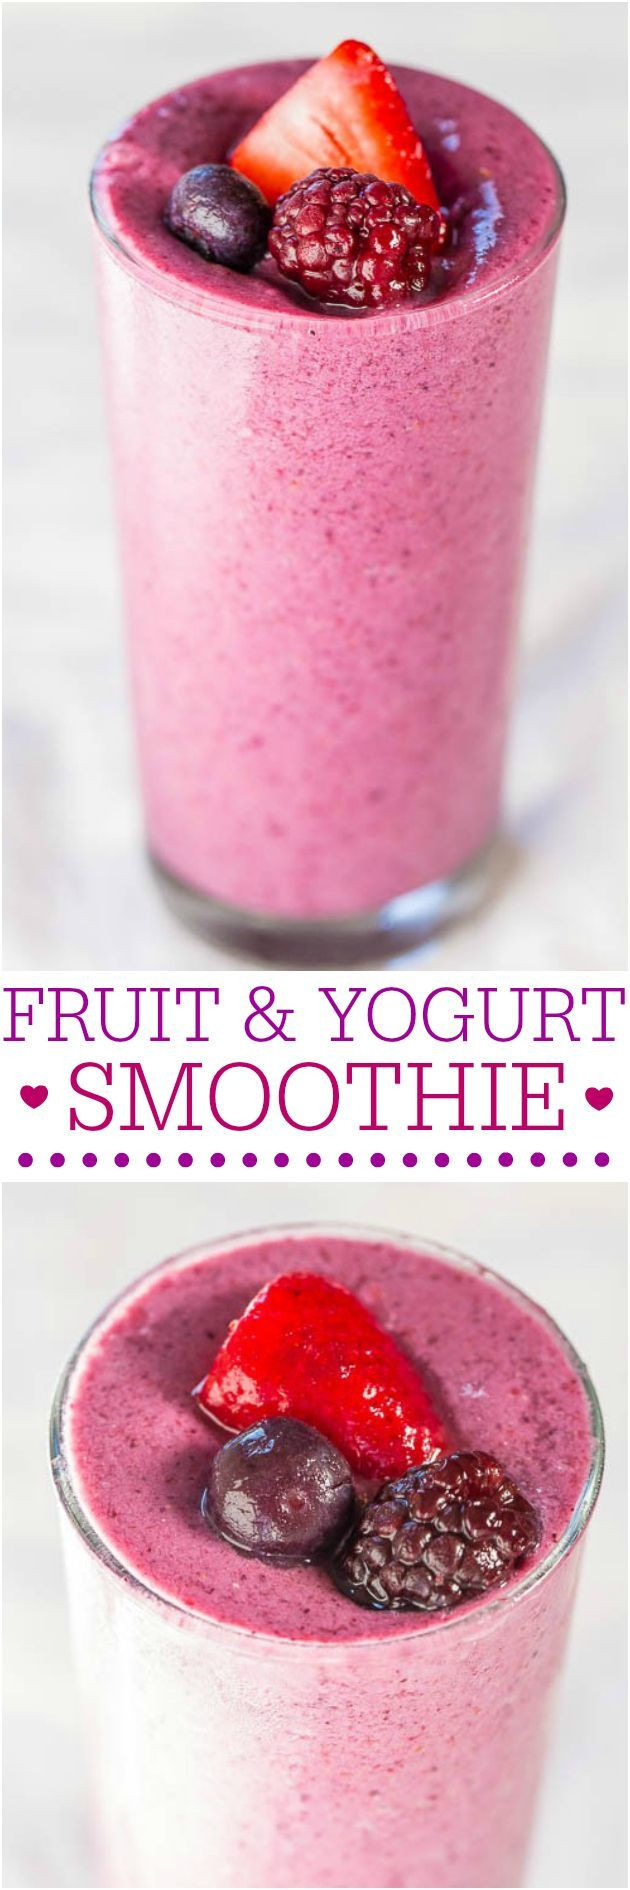 Healthy Smoothies With Yogurt
 17 Best ideas about Frozen Fruit Smoothie on Pinterest